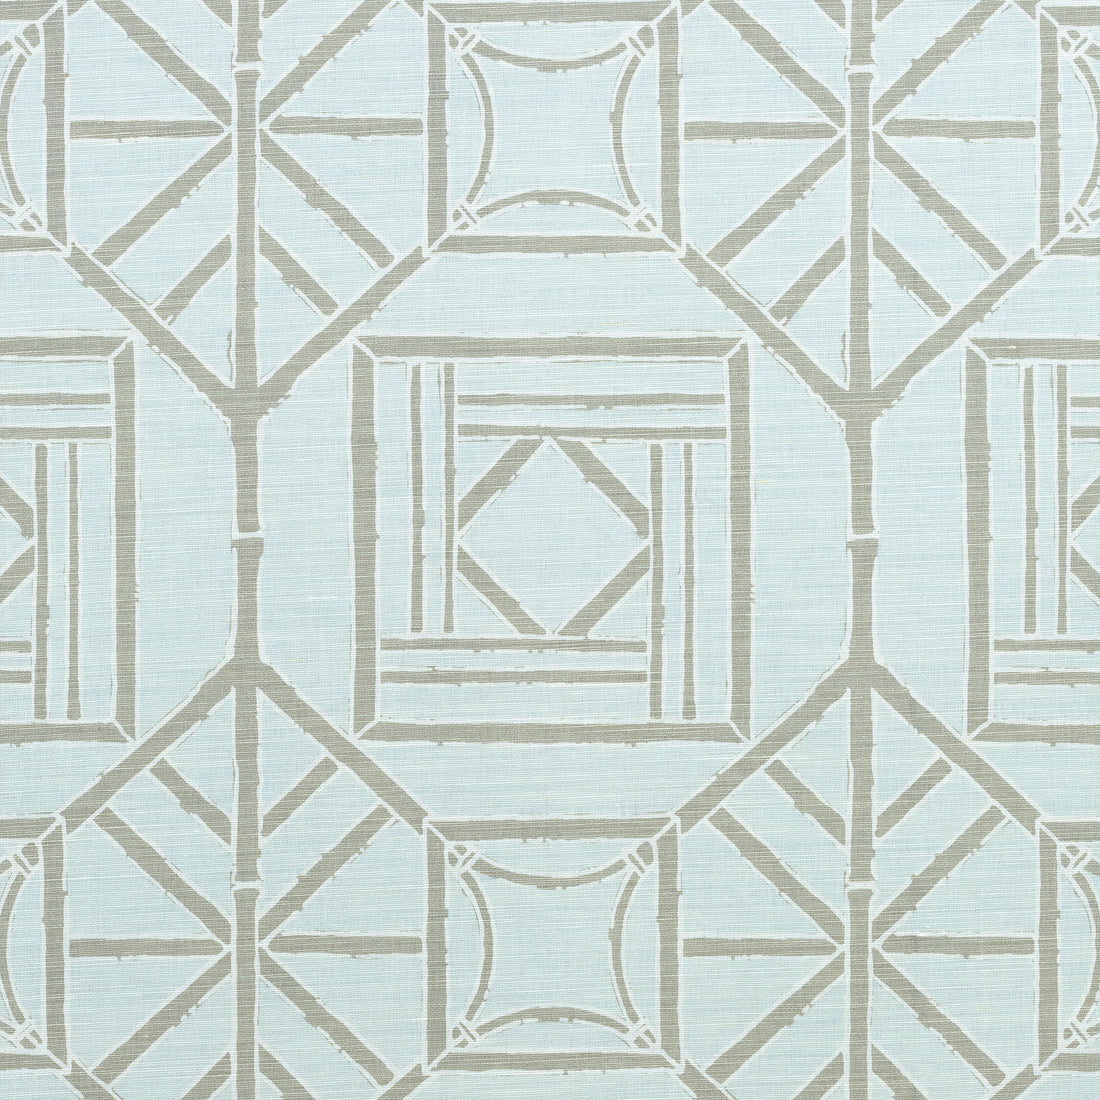 Shoji Panel fabric in aqua color - pattern number F975519 - by Thibaut in the Dynasty collection